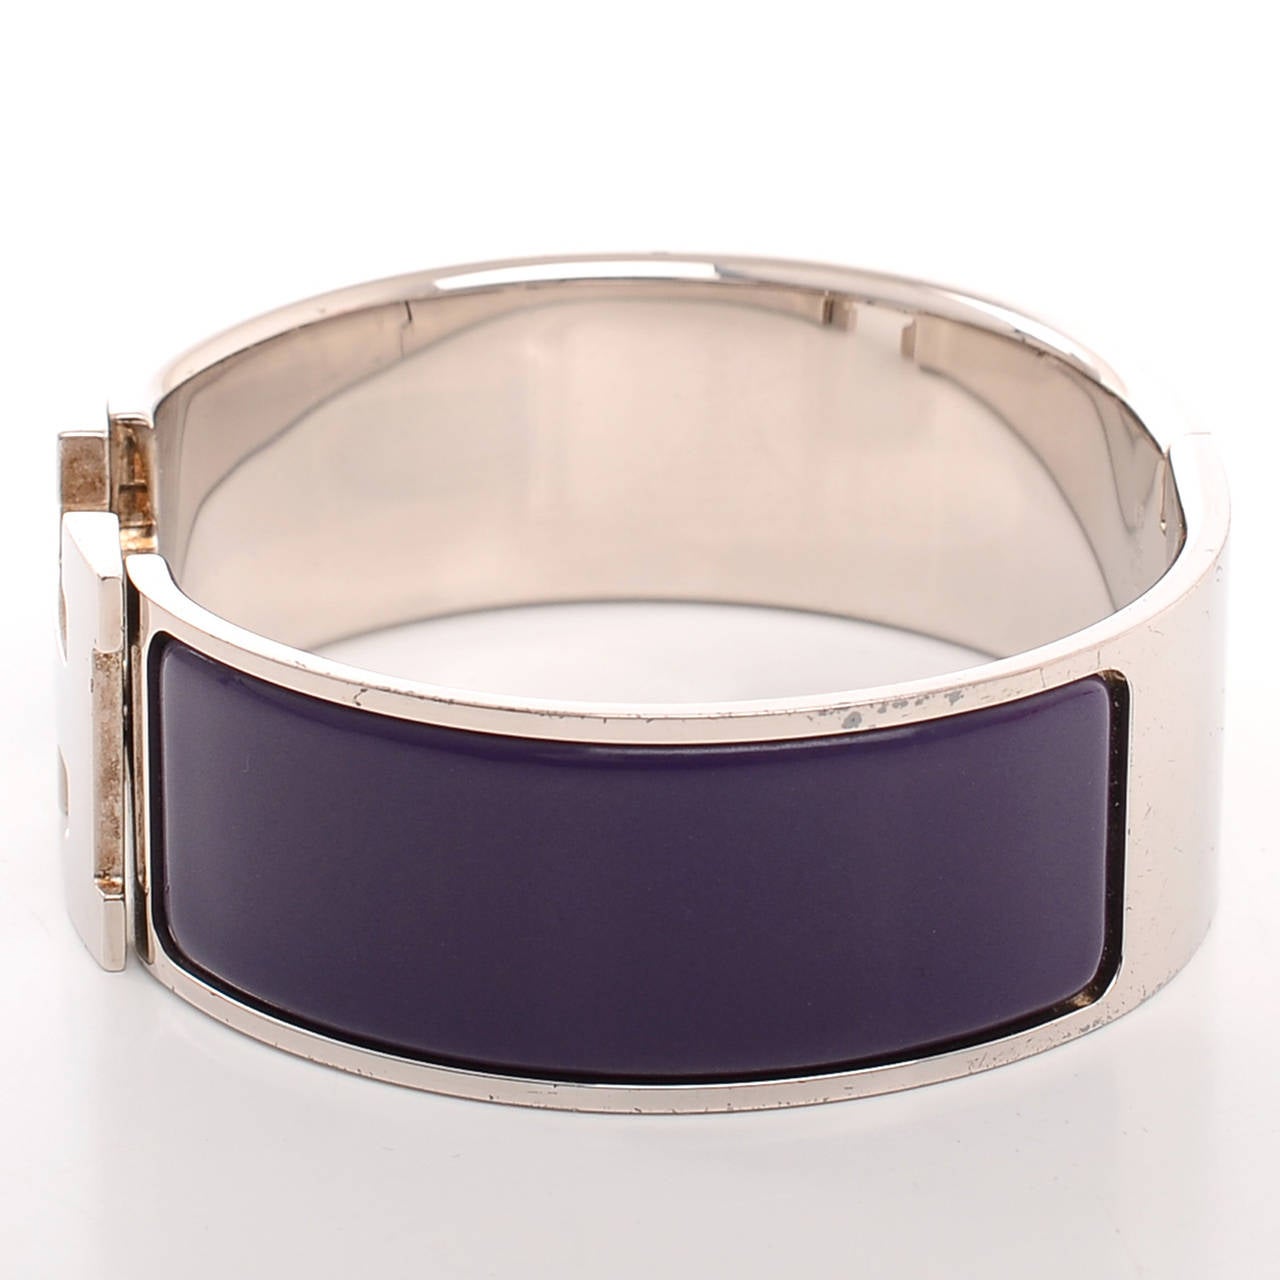 Hermes wide Clic Clac H bracelet in Prune (purple) enamel with palladium and silver plated hardware in size PM.

Origin: France

Condition: Excellent - minor scratches on the metal; no signs of wear on enamel

Accompanied by: Hermes box,